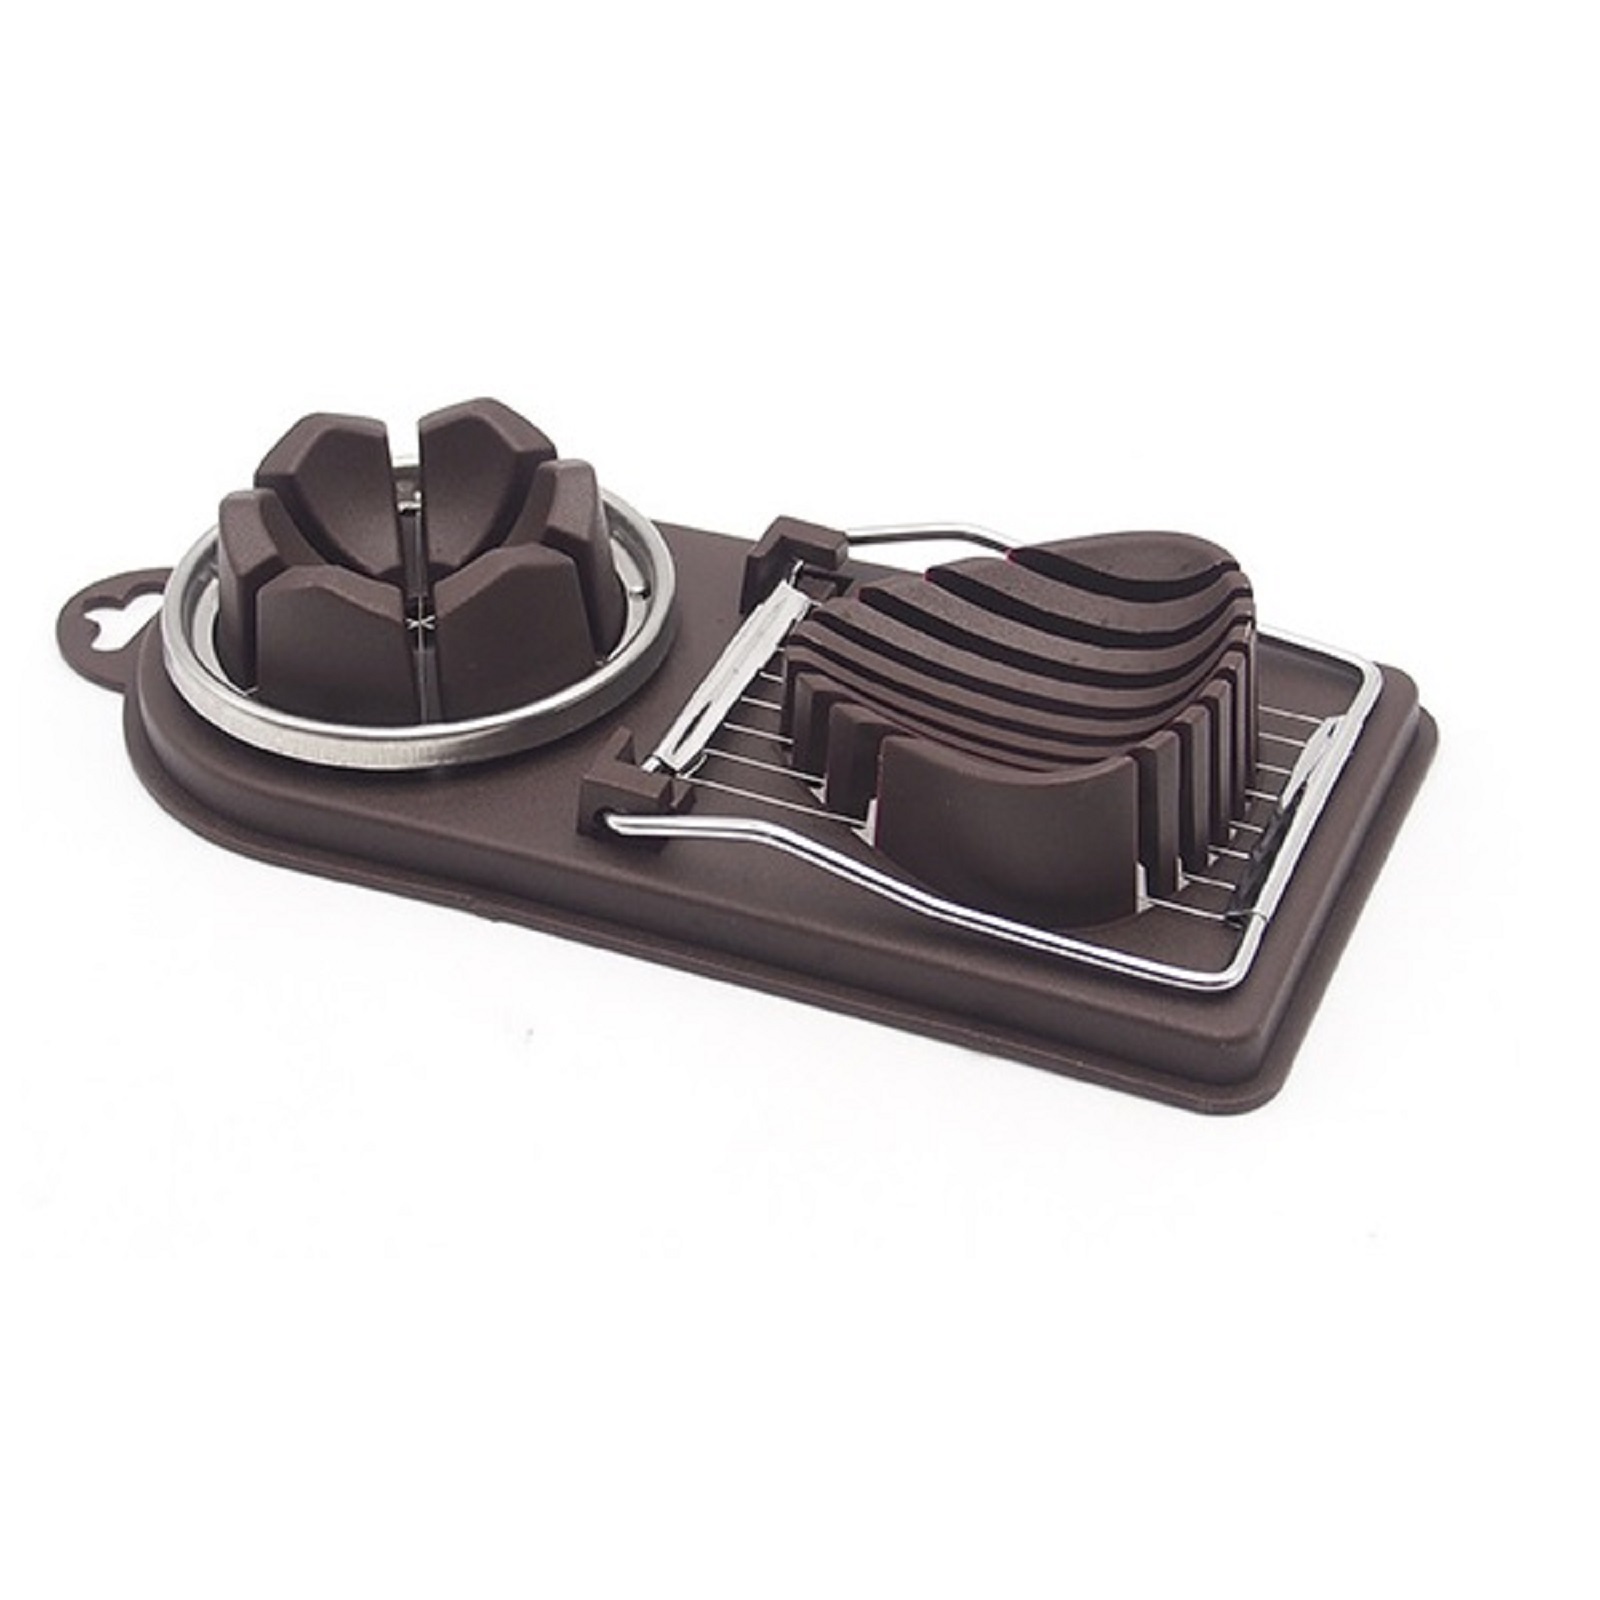 Dual Egg Slicer Stainless Steel Wire Dual Function Egg Dicer & Wedger (Brown)